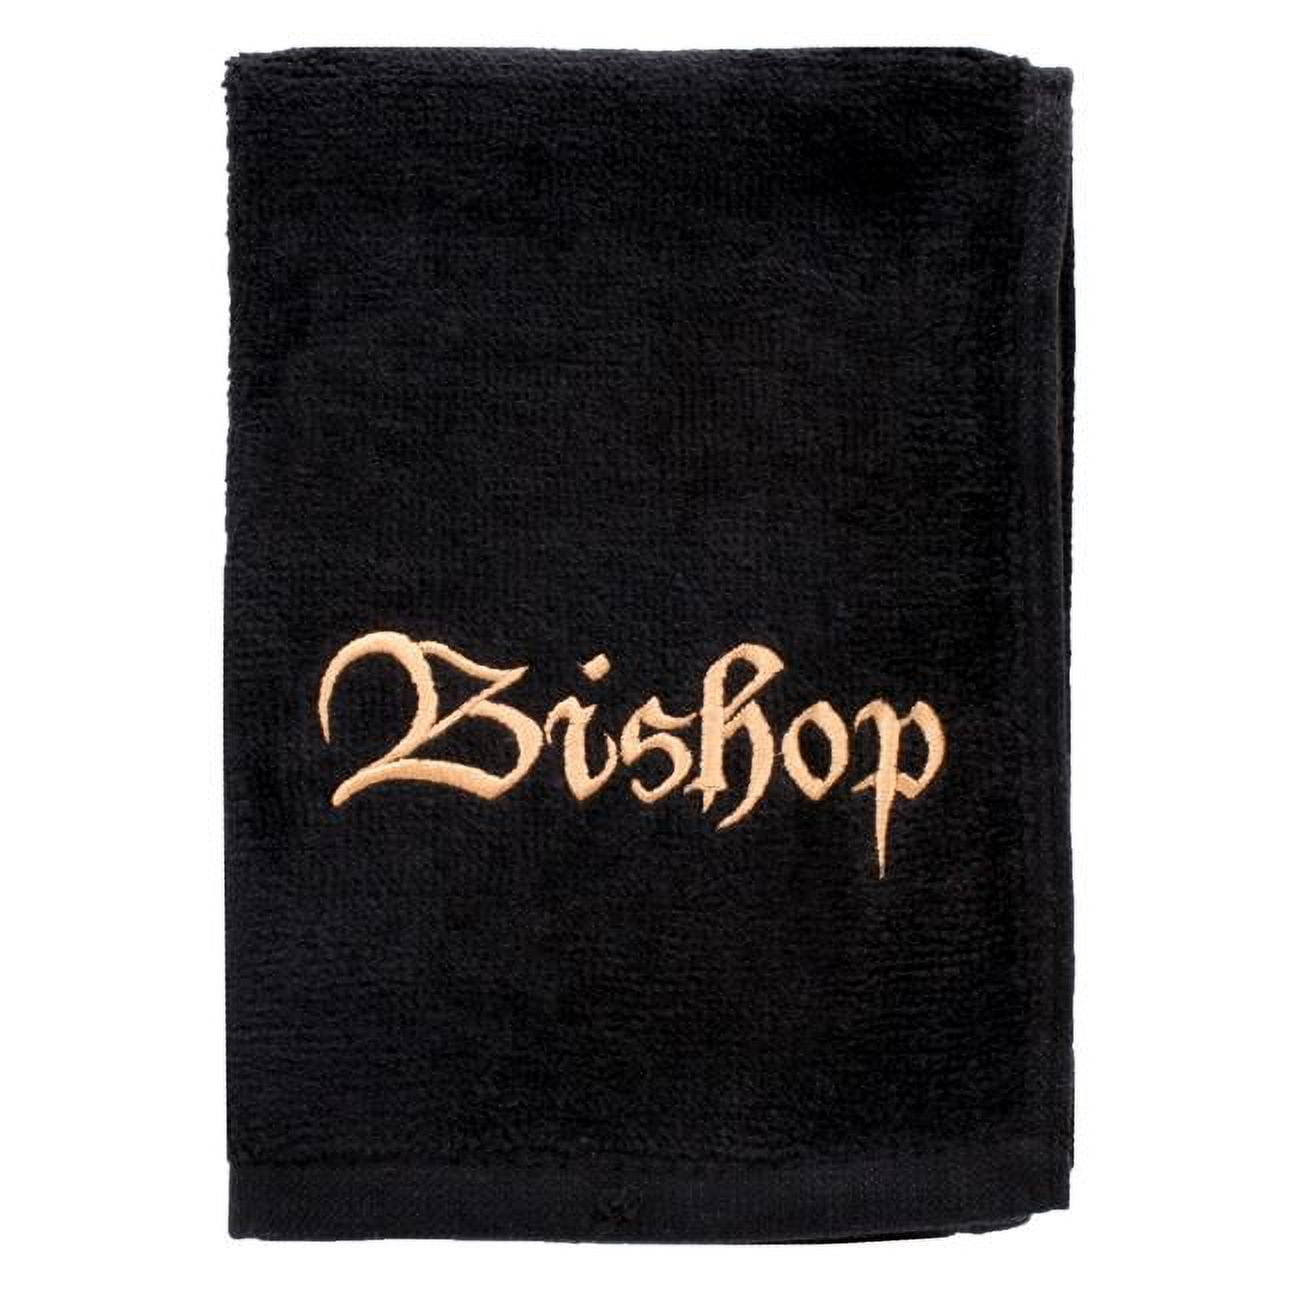 Picture of Swanson Christian Supply 272268 Towel - Bishop-Black with Gold Lettering